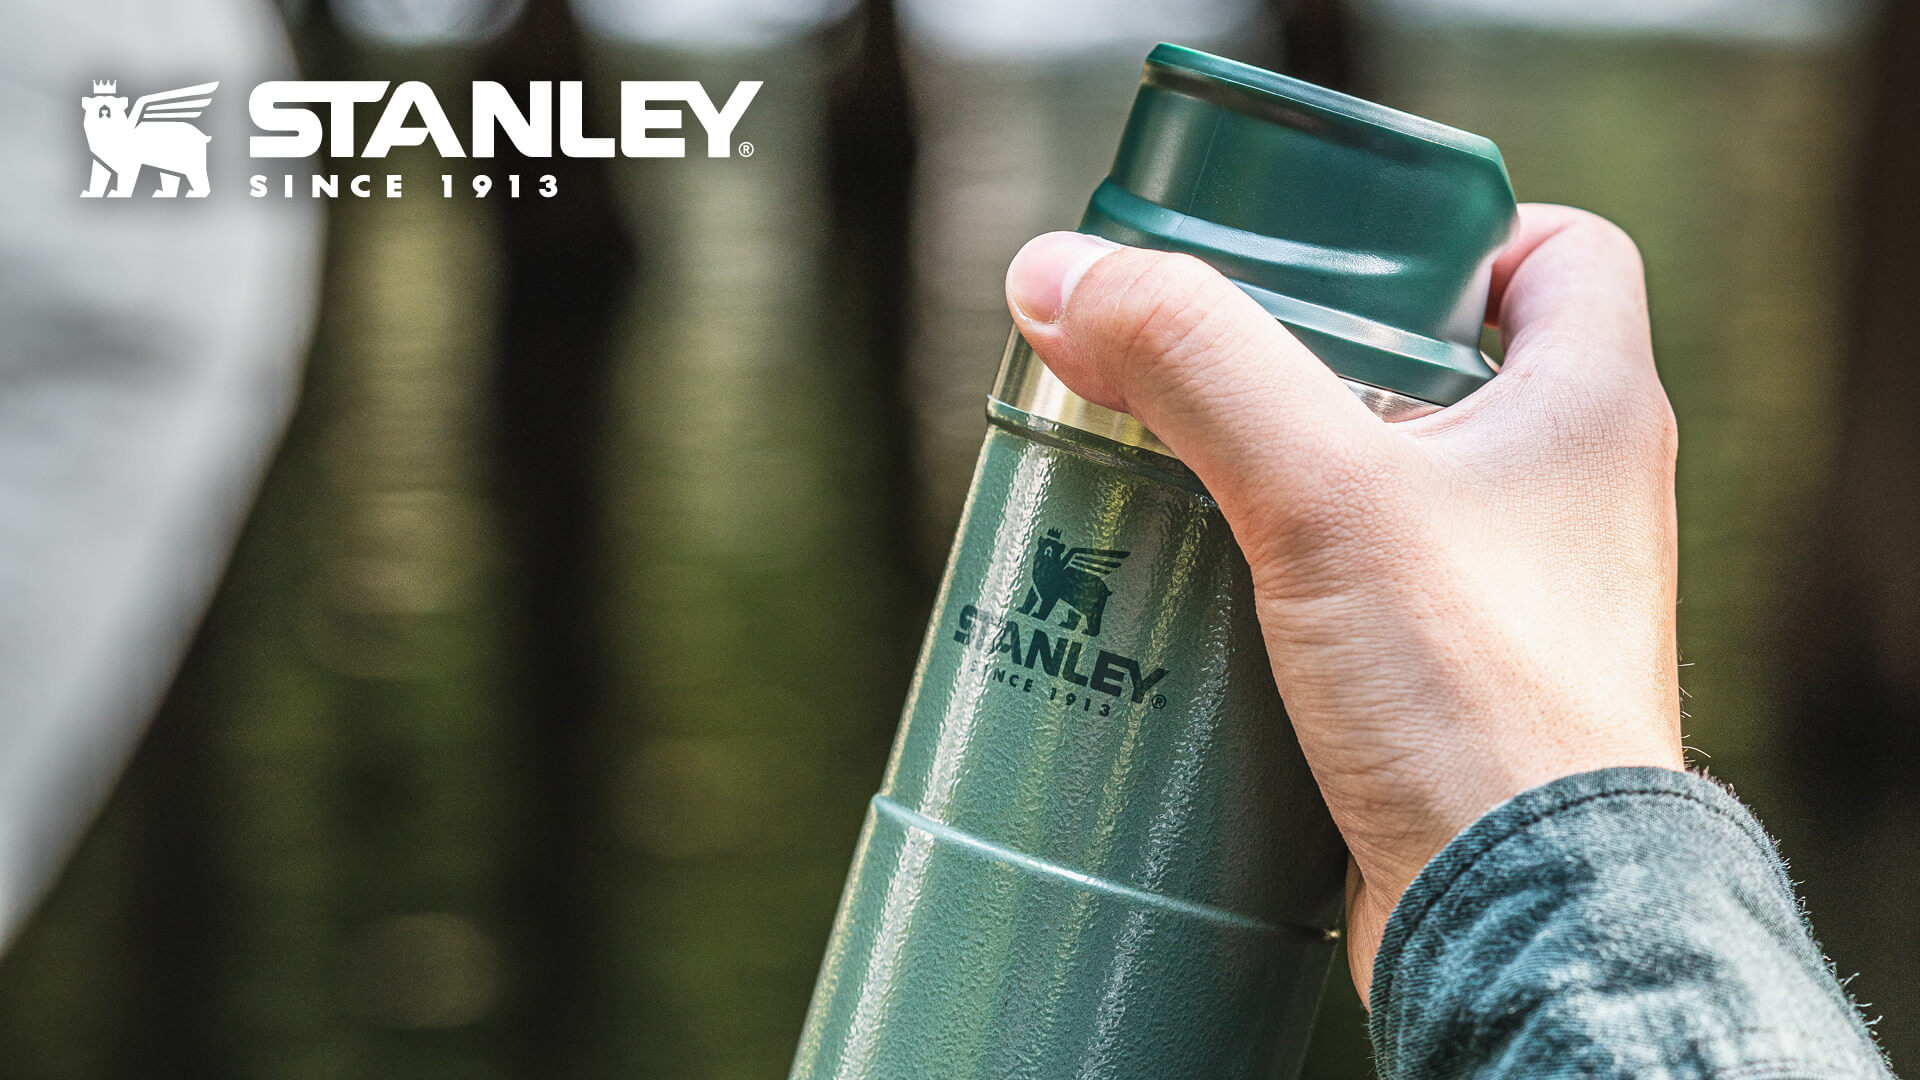 Stanley-Banners-1920-x-1080-px-21_1.jpg